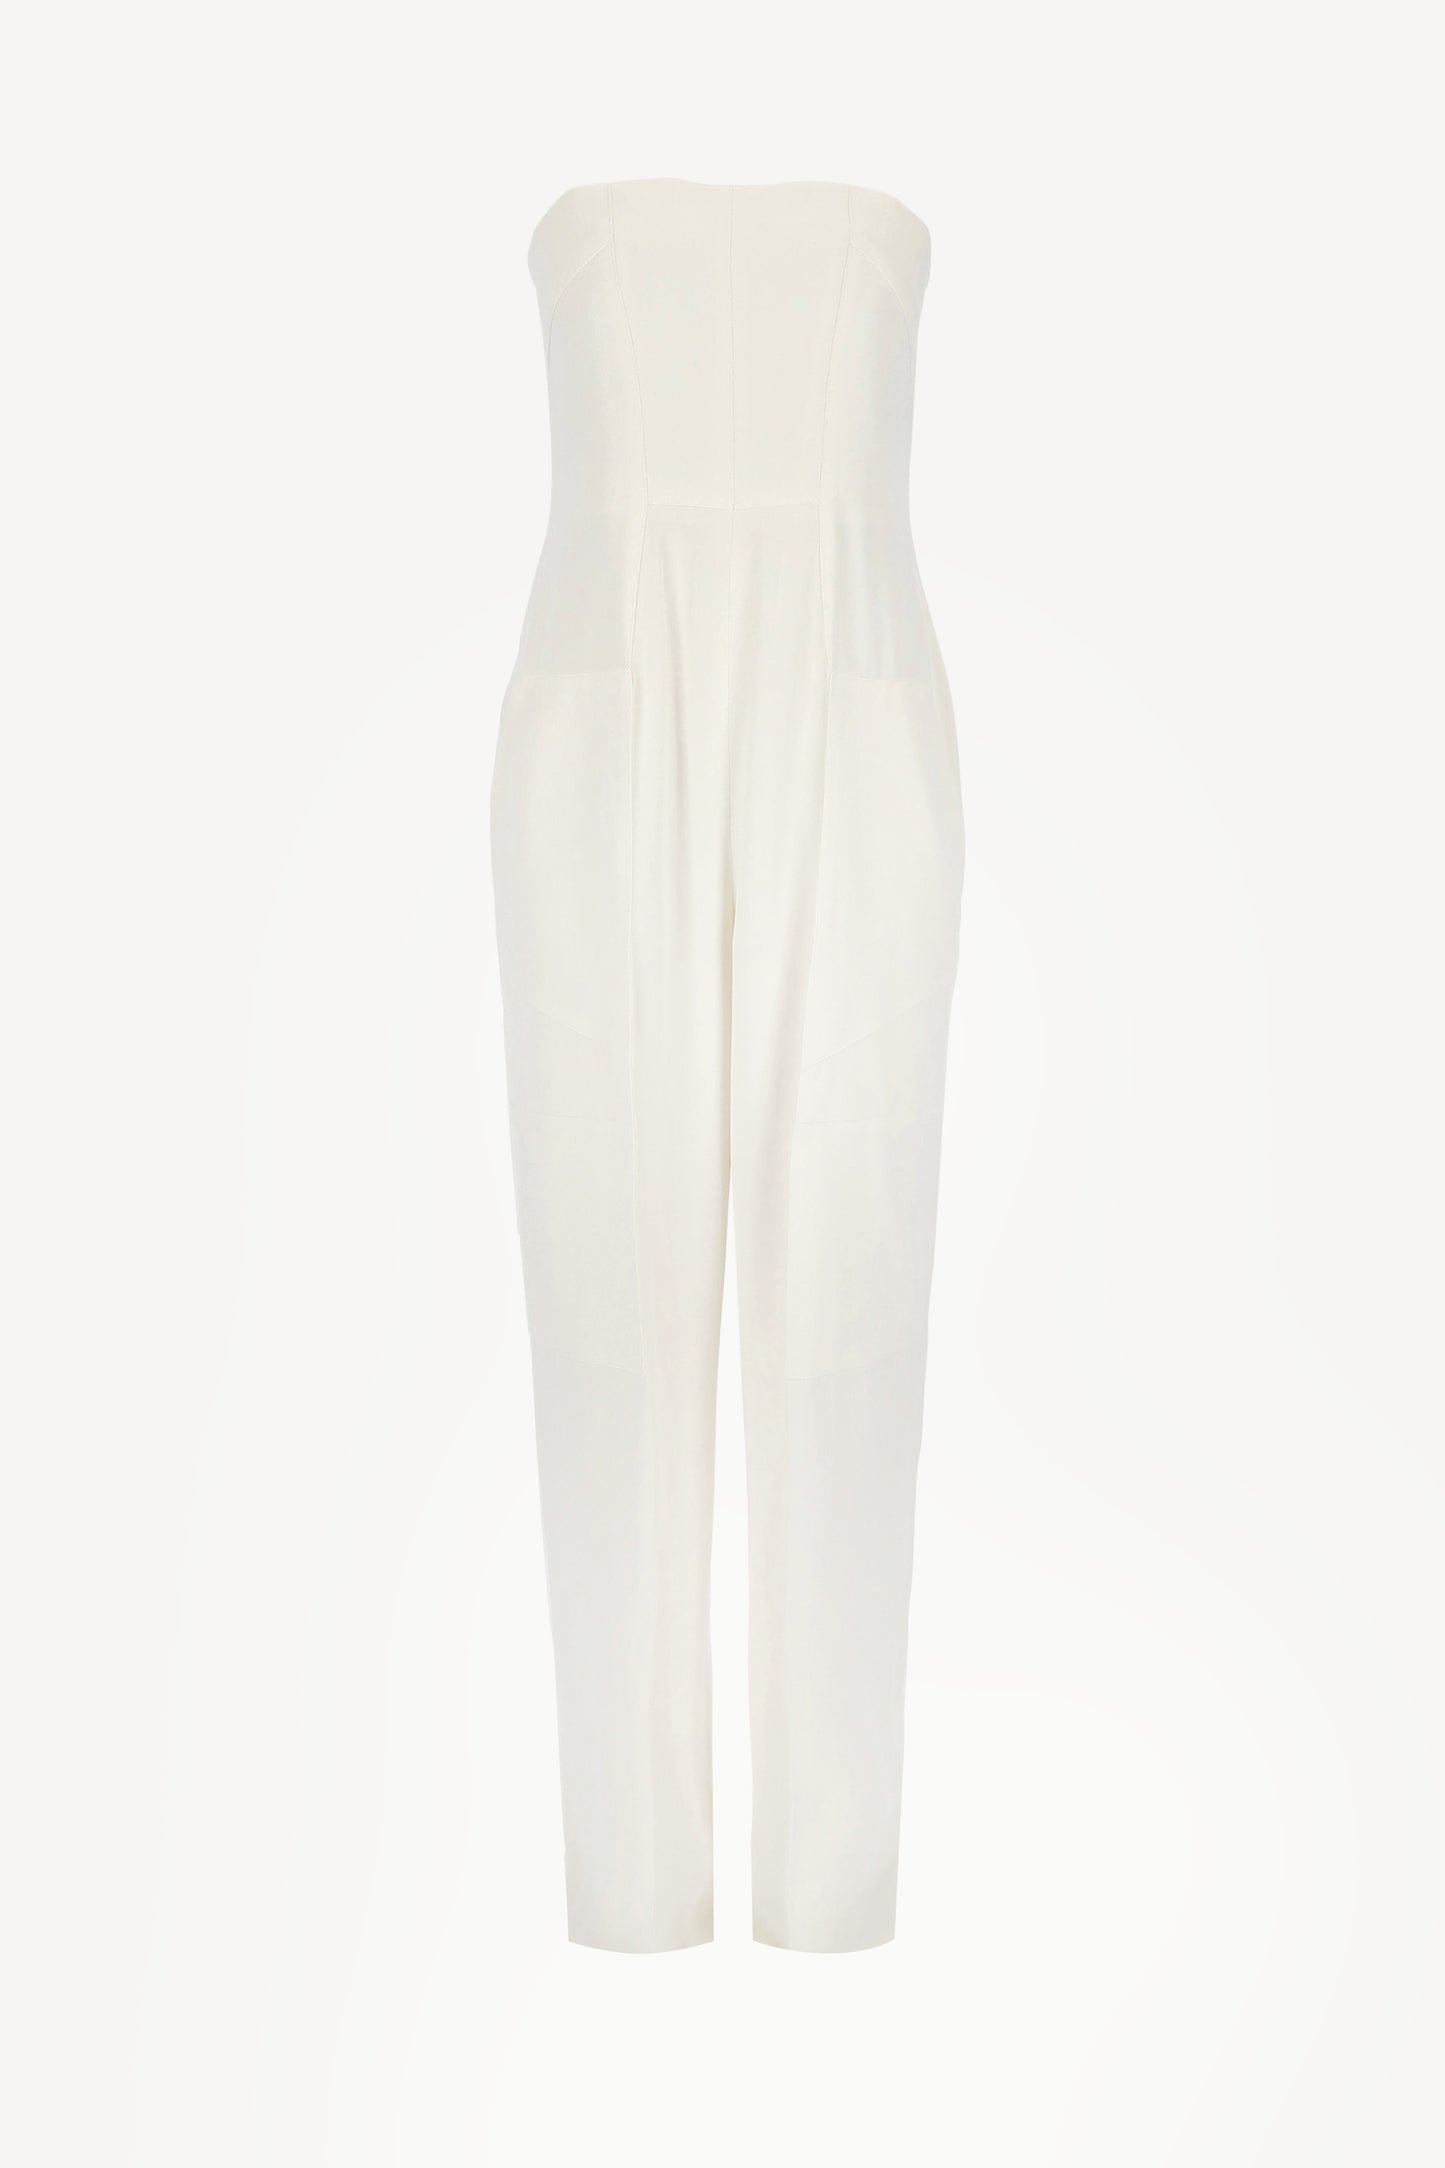 Jumpsuit in WeißTom Ford - Anita Hass